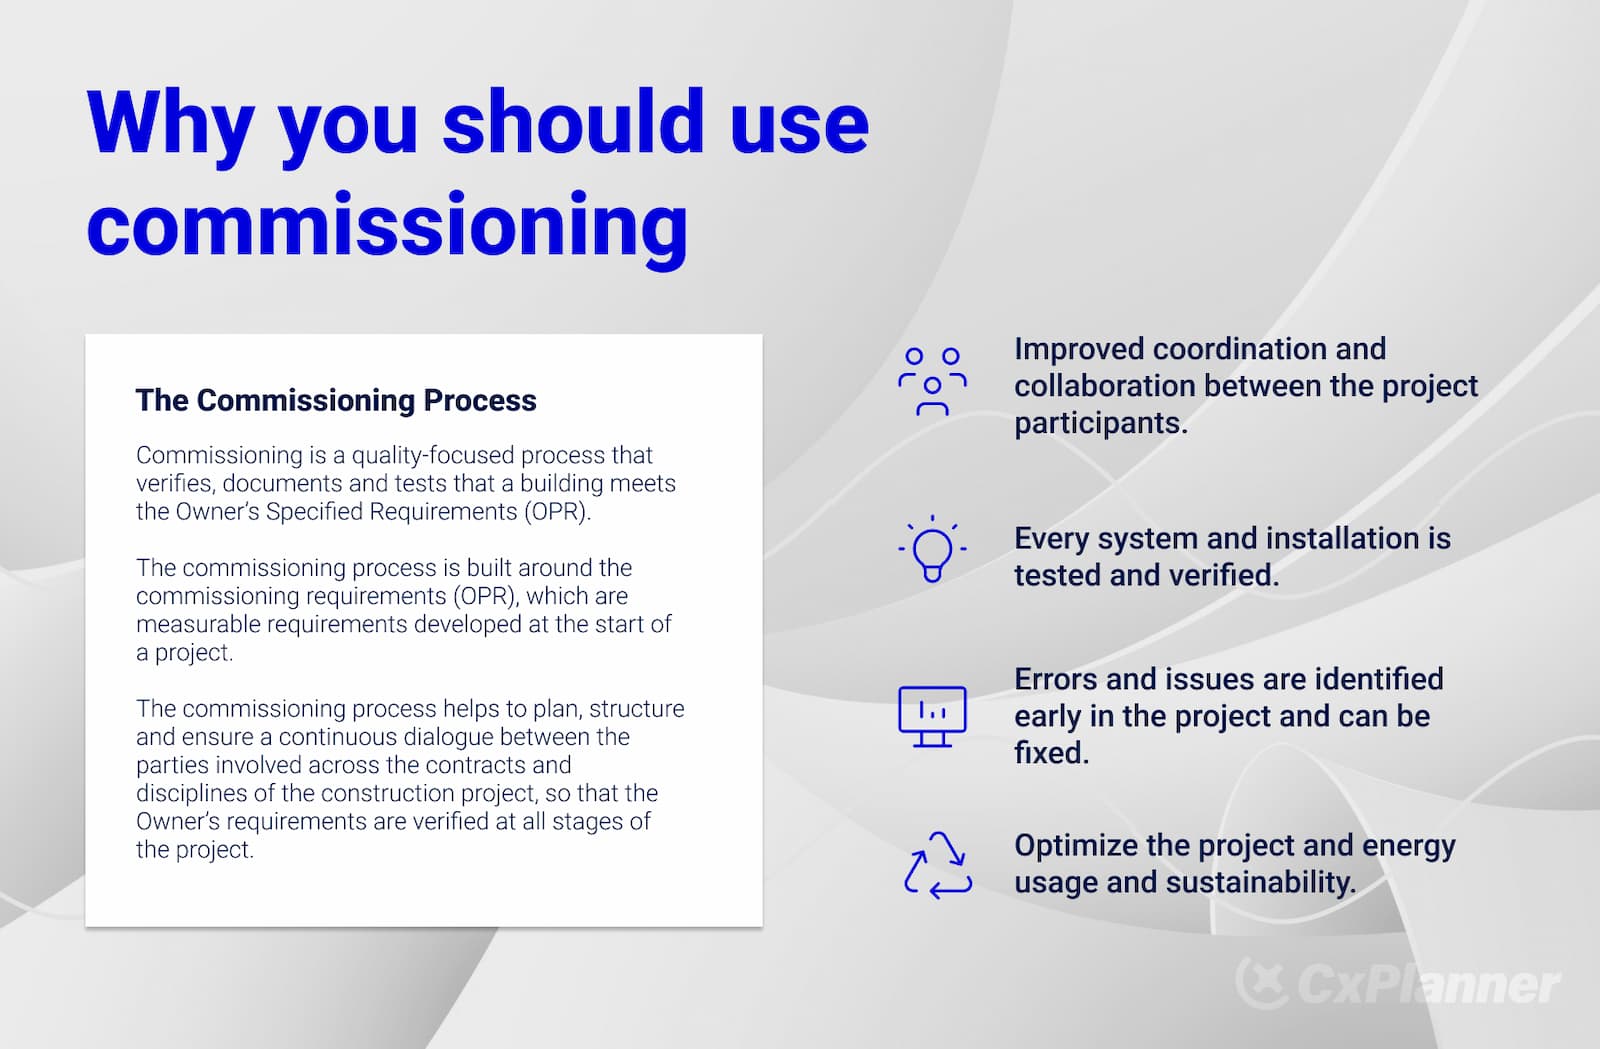 Why you should use the commissioning process.